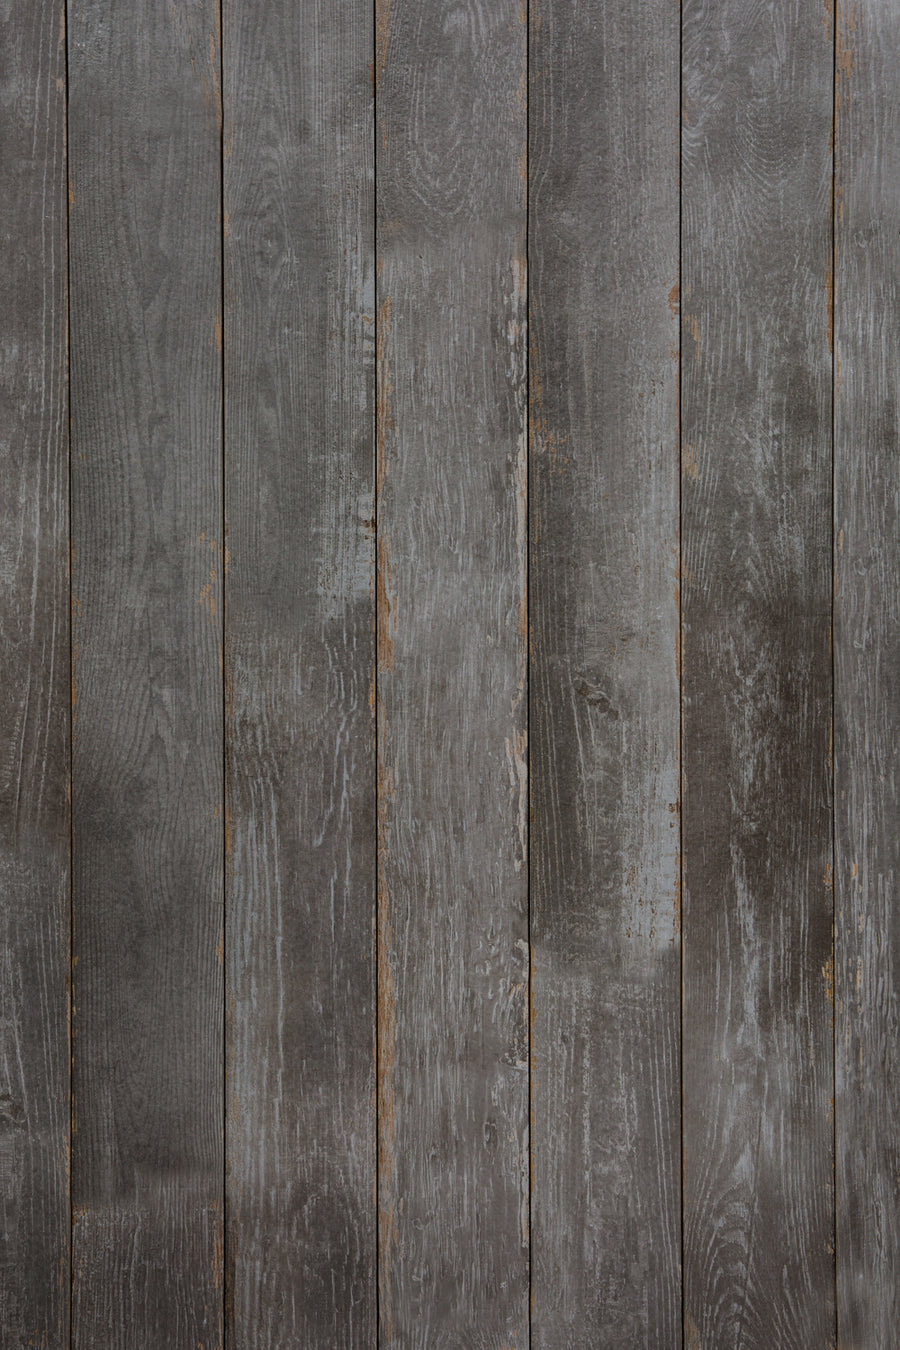 Rustic gray wood photography surface